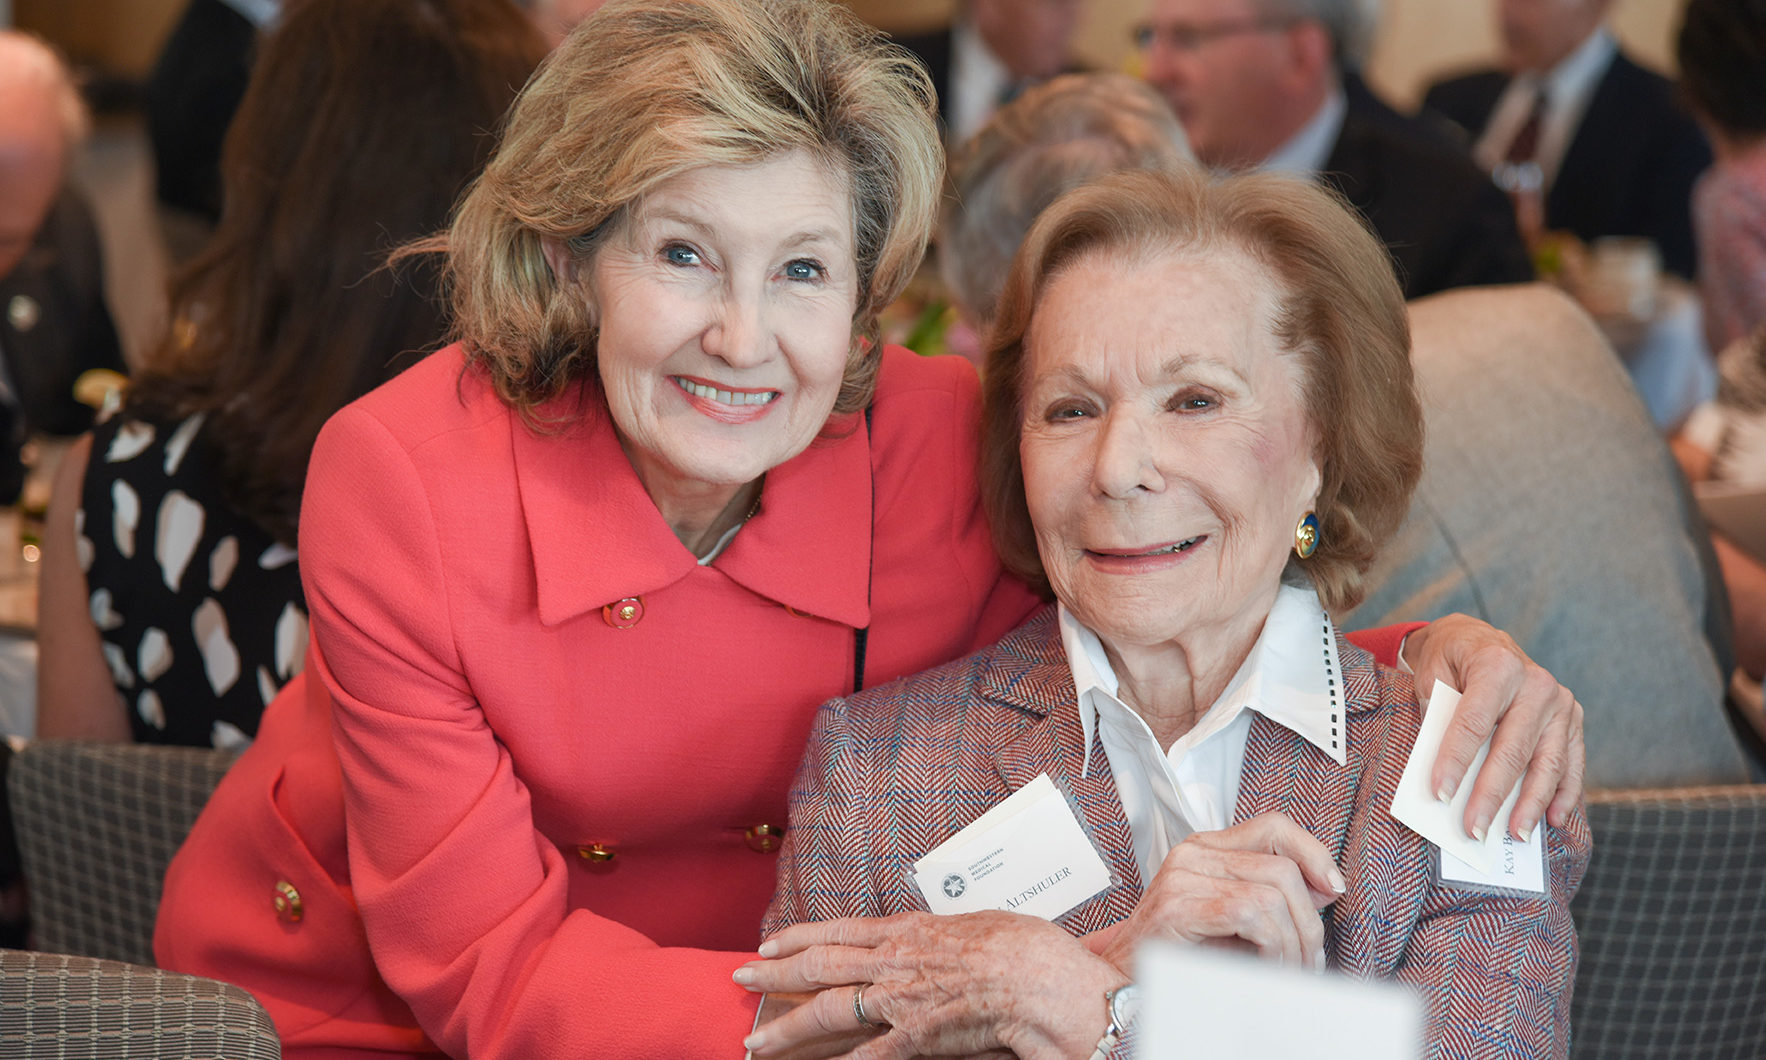 Two women at an event